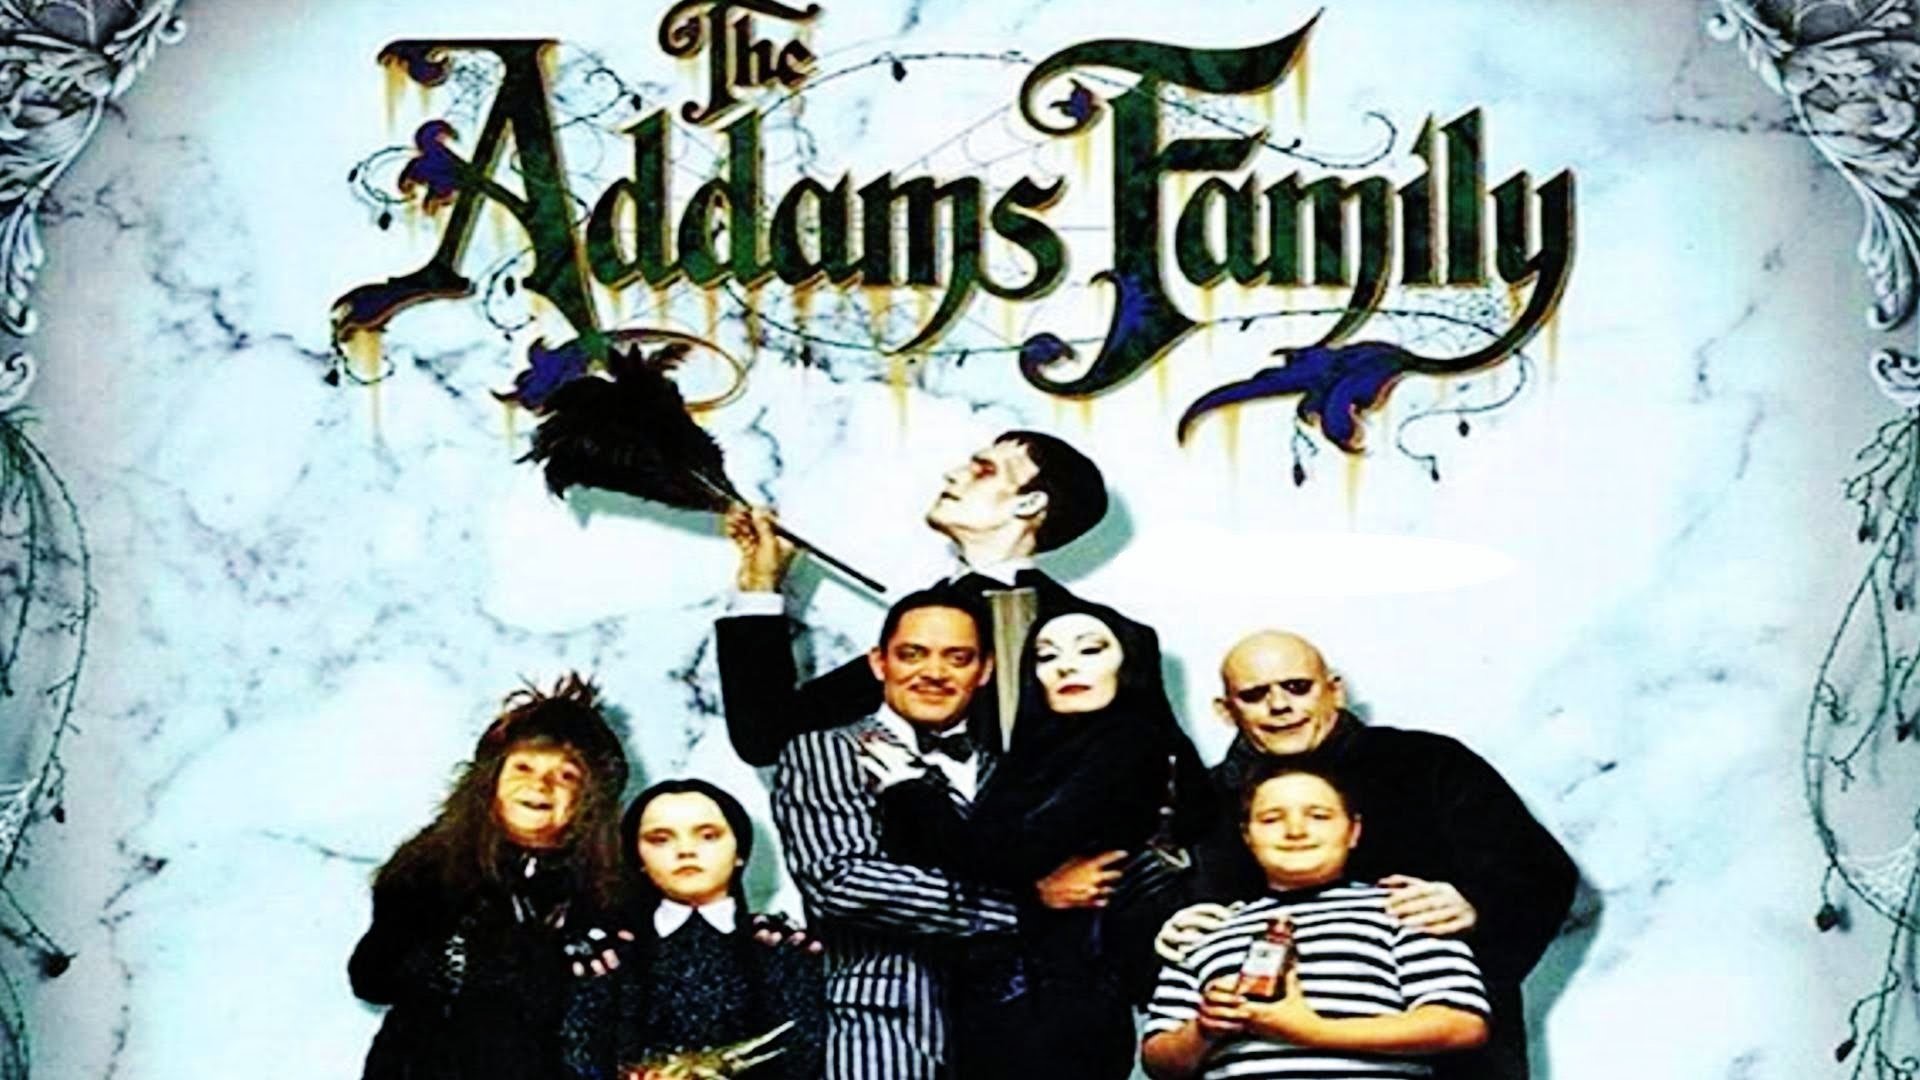 the addams family 1991 movie download